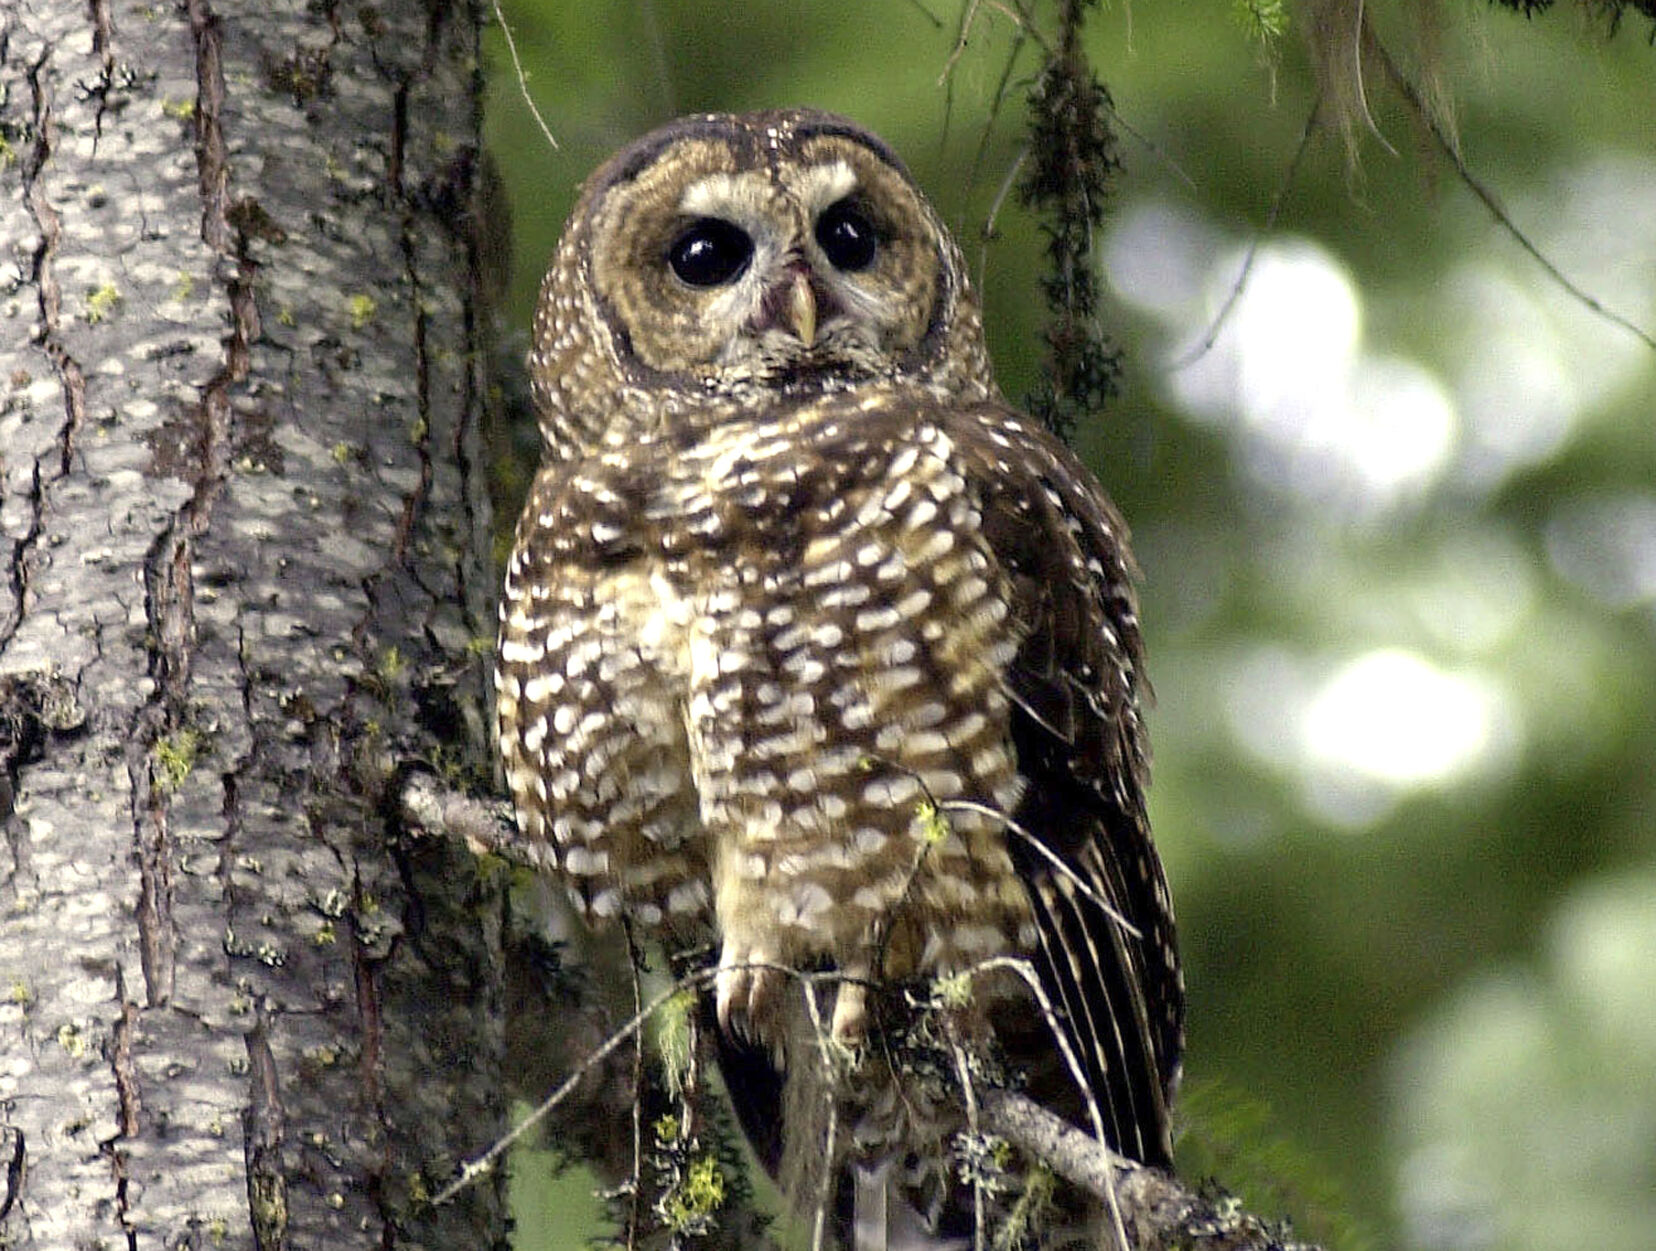 <p>FILE - In this May 8, 2003, file photo, a northern spotted owl sits on a tree branch in the Deschutes National Forest near Camp Sherman, Ore. The U.S. Fish and Wildlife Service plans to reinstate a decades-old regulation that mandates protections for species that are newly classified as threatened. (AP Photo/Don Ryan, File)</p>   PHOTO CREDIT: Don Ryan 